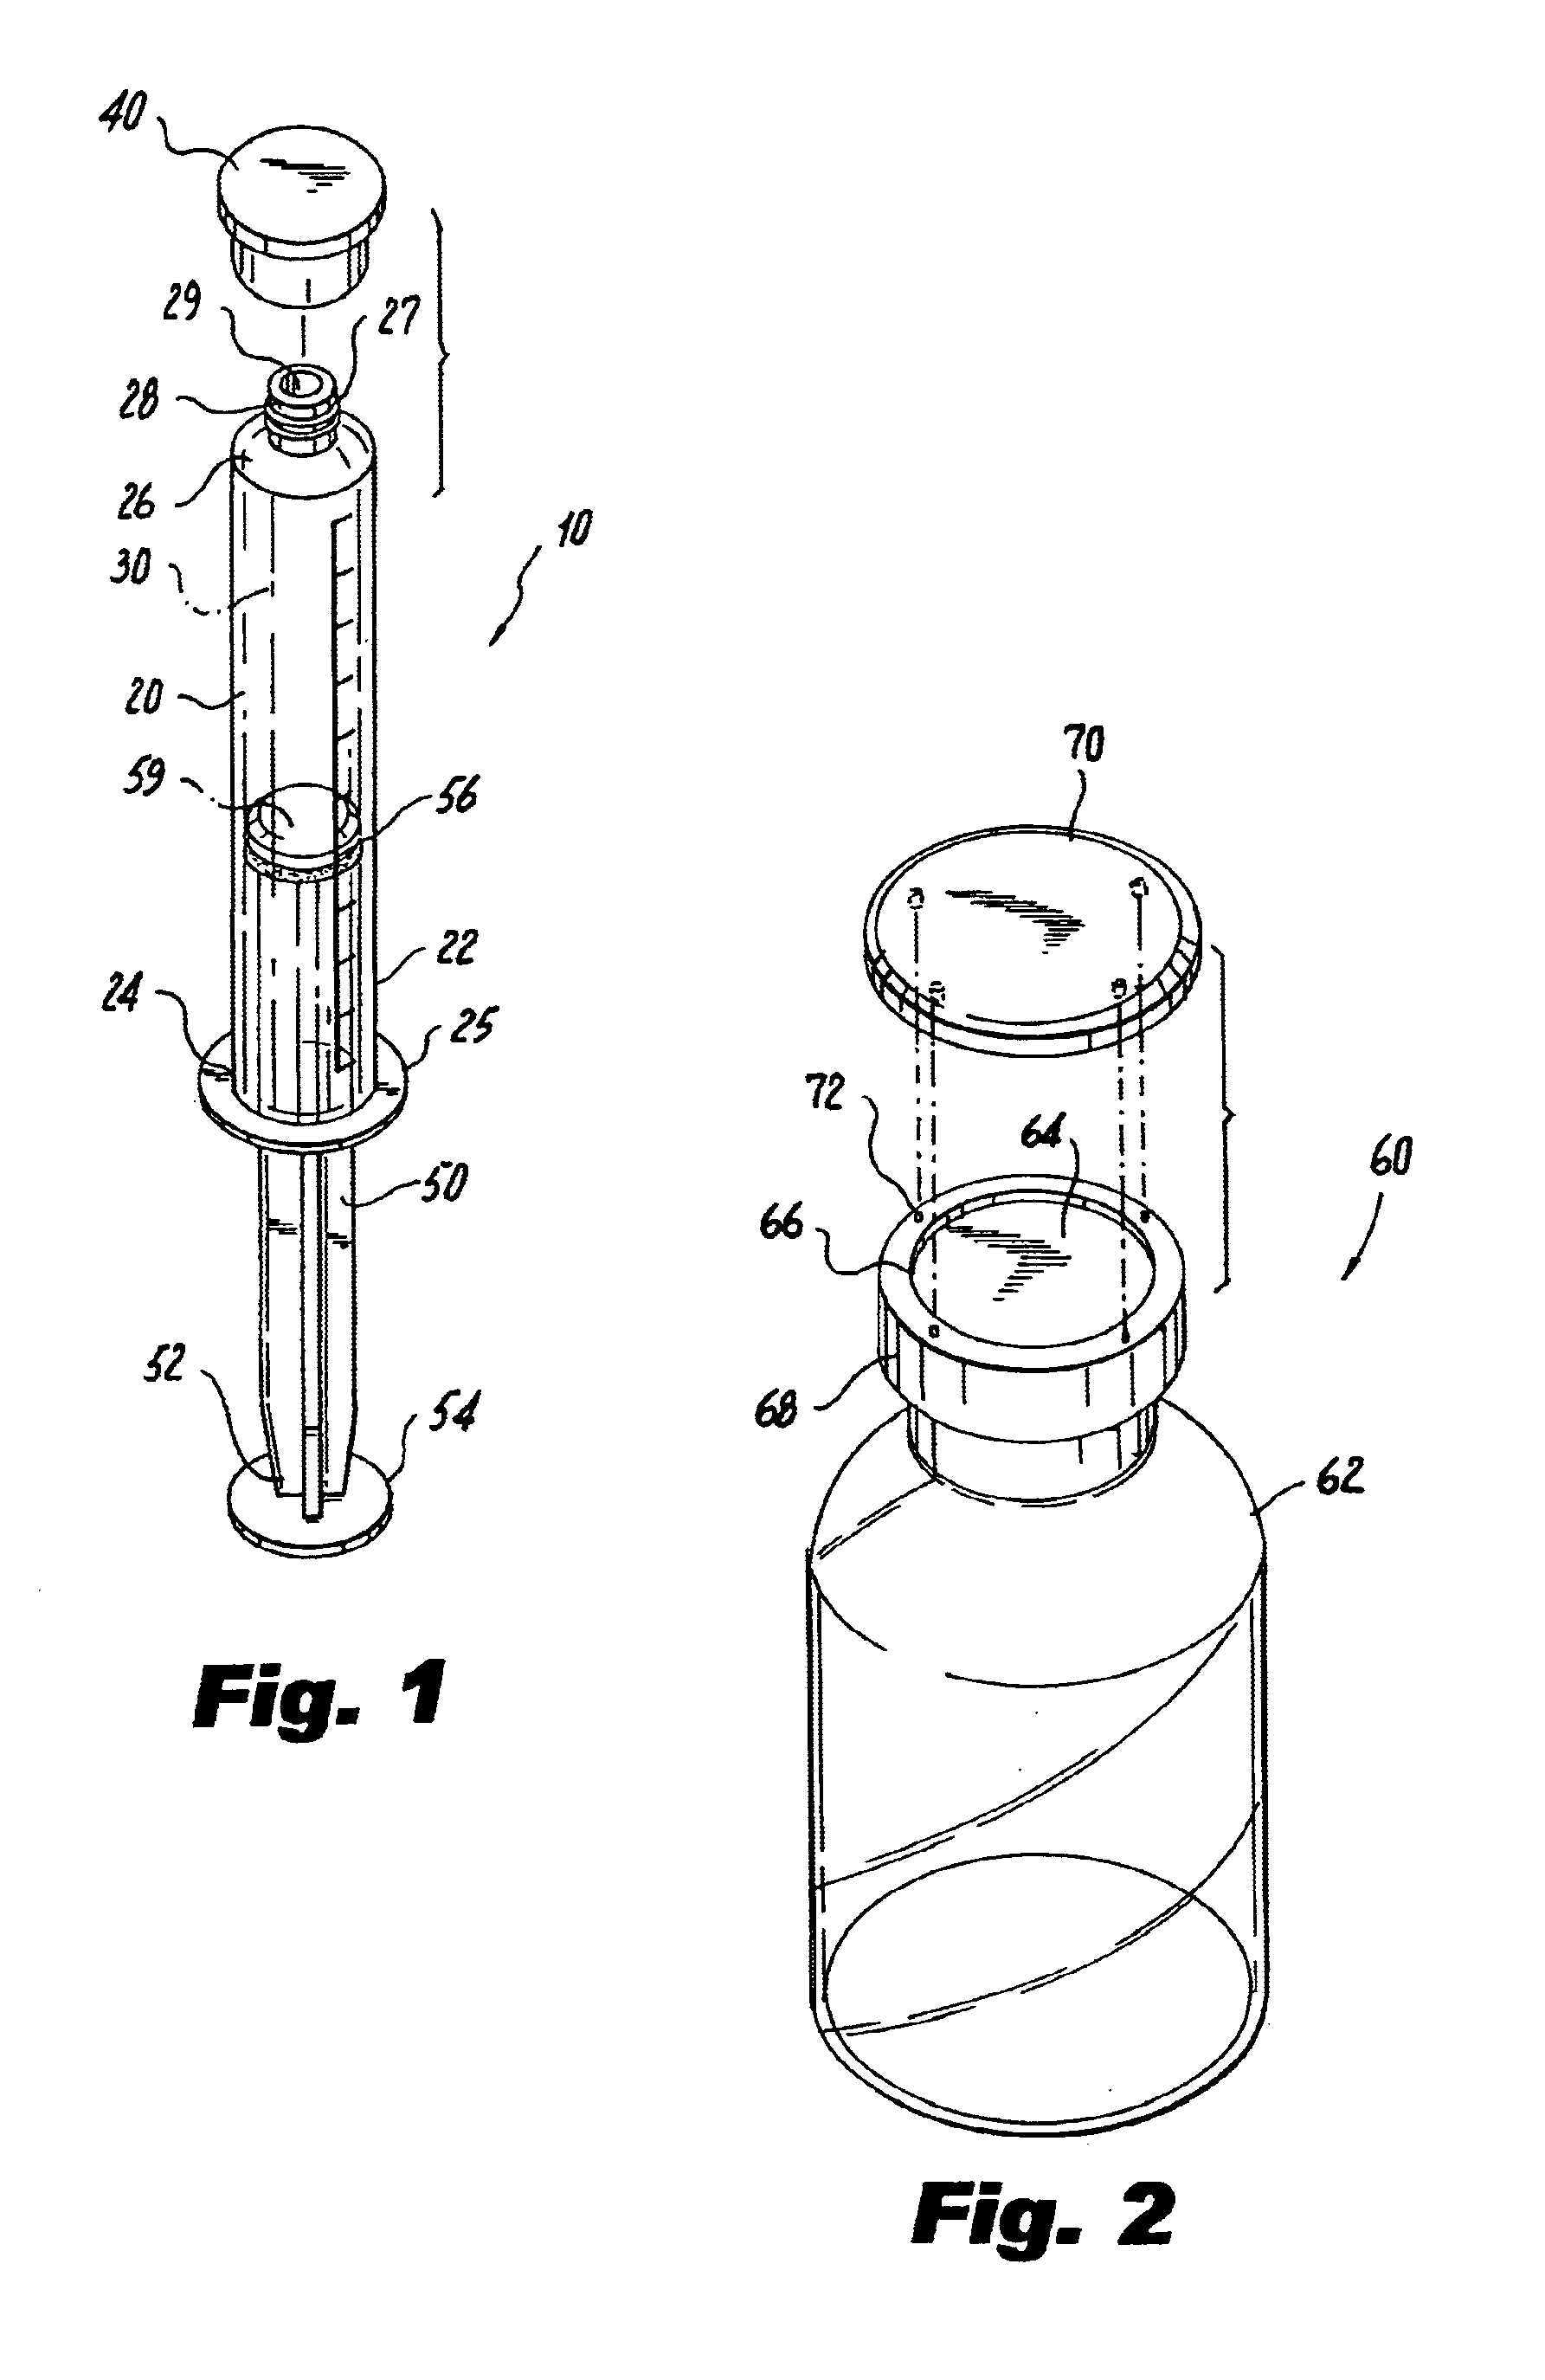 Automated means for withdrawing a syringe plunger